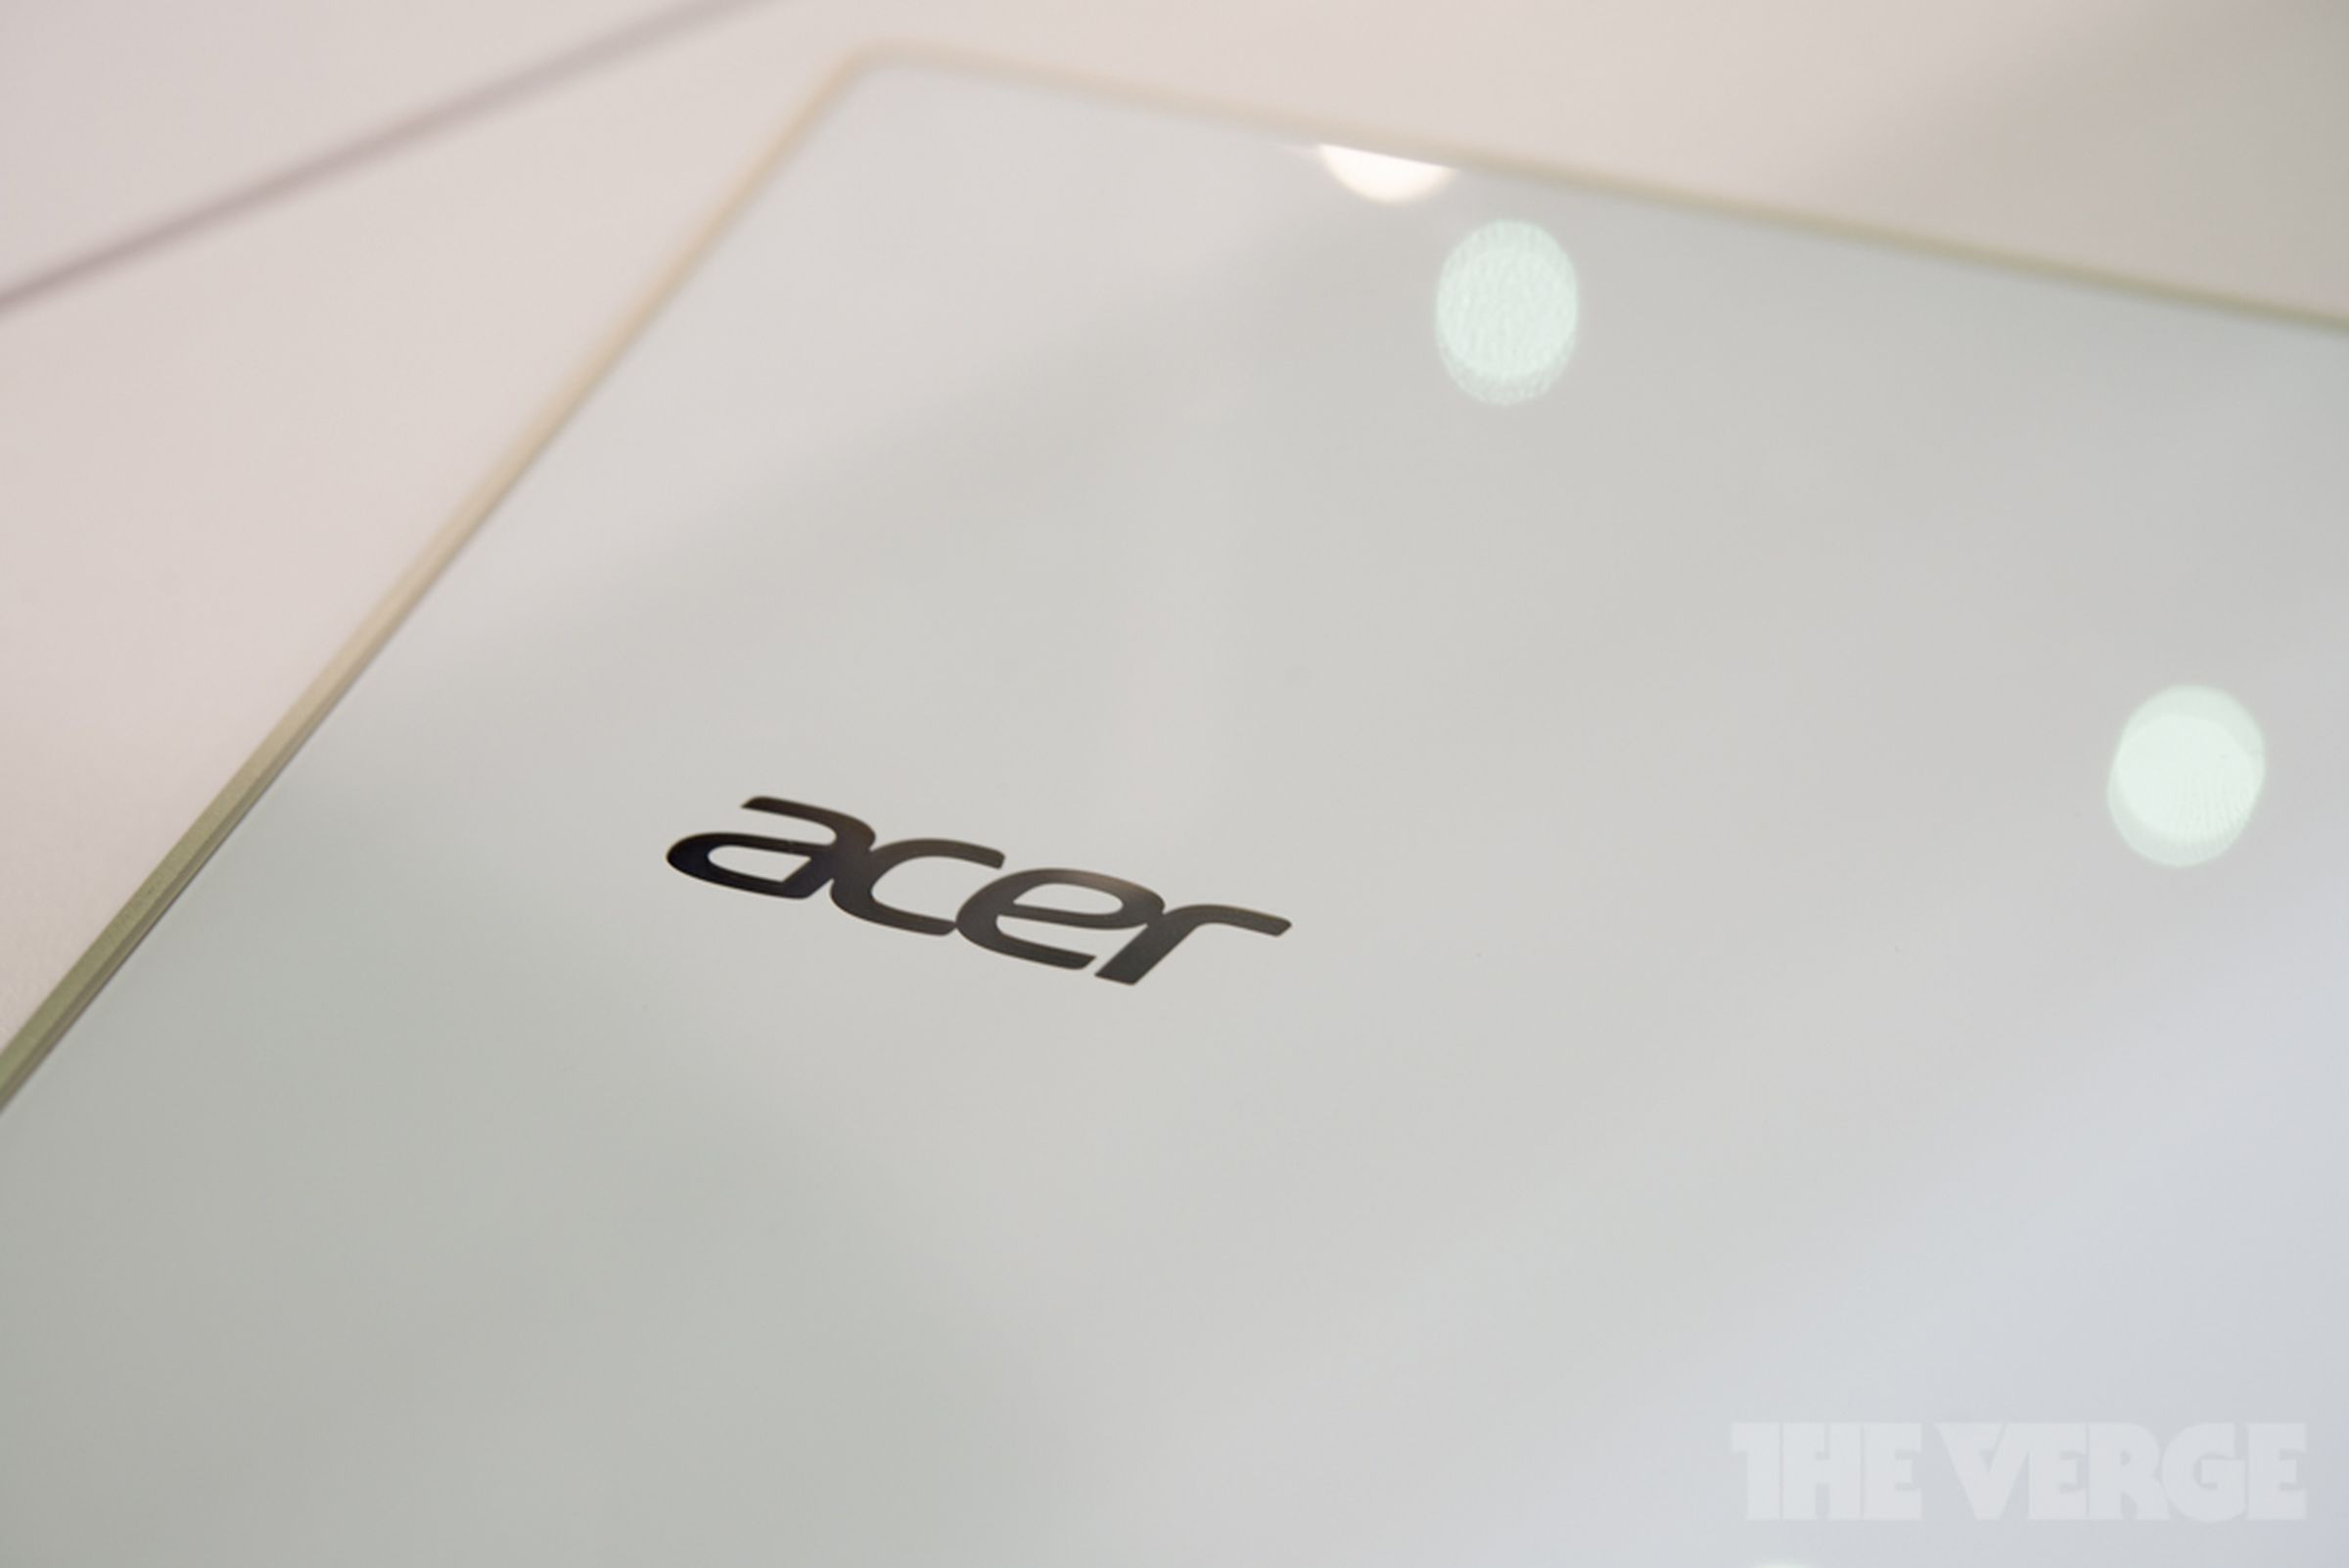 Acer Aspire S7 hands-on pictures